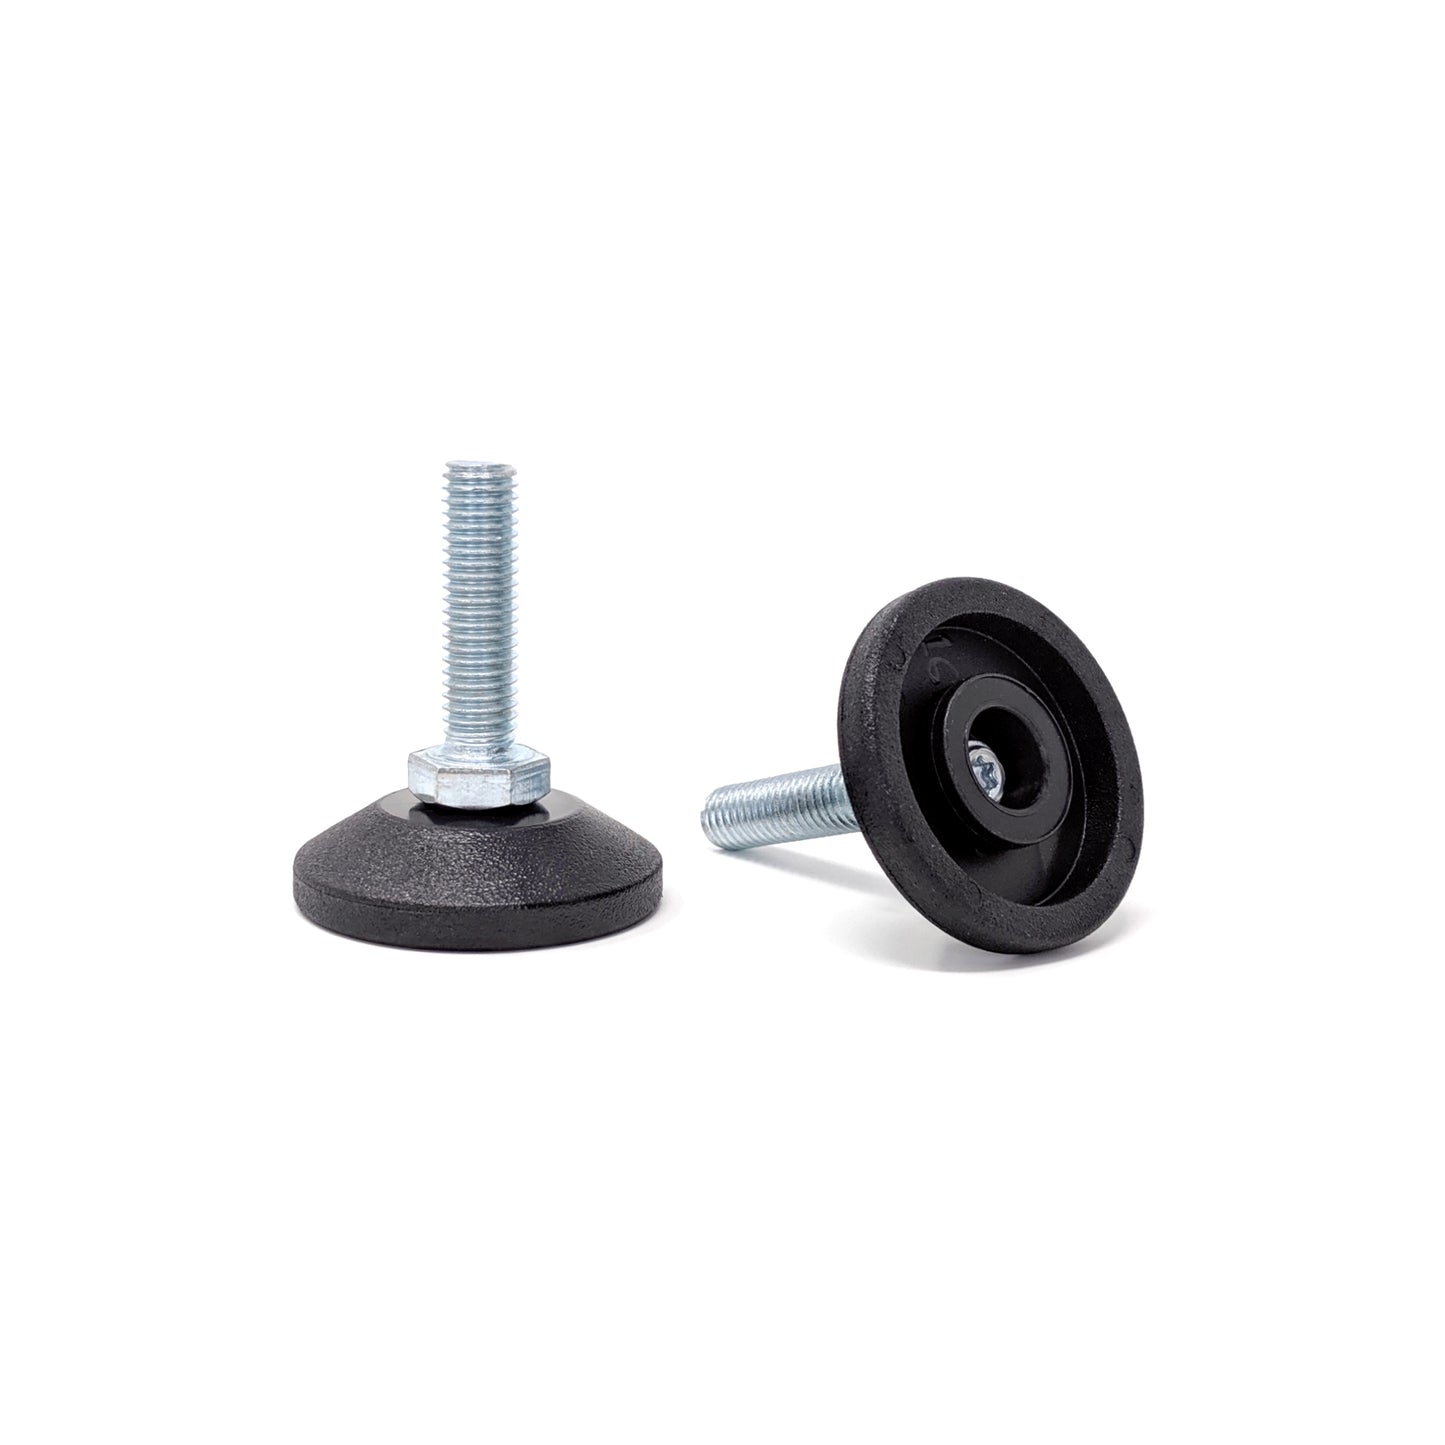 Adjustable Feet, 38mm Dia. Base, M8 30mm Thread, 400kg Static Load Capacity - Made In Germany - Keay Vital Parts